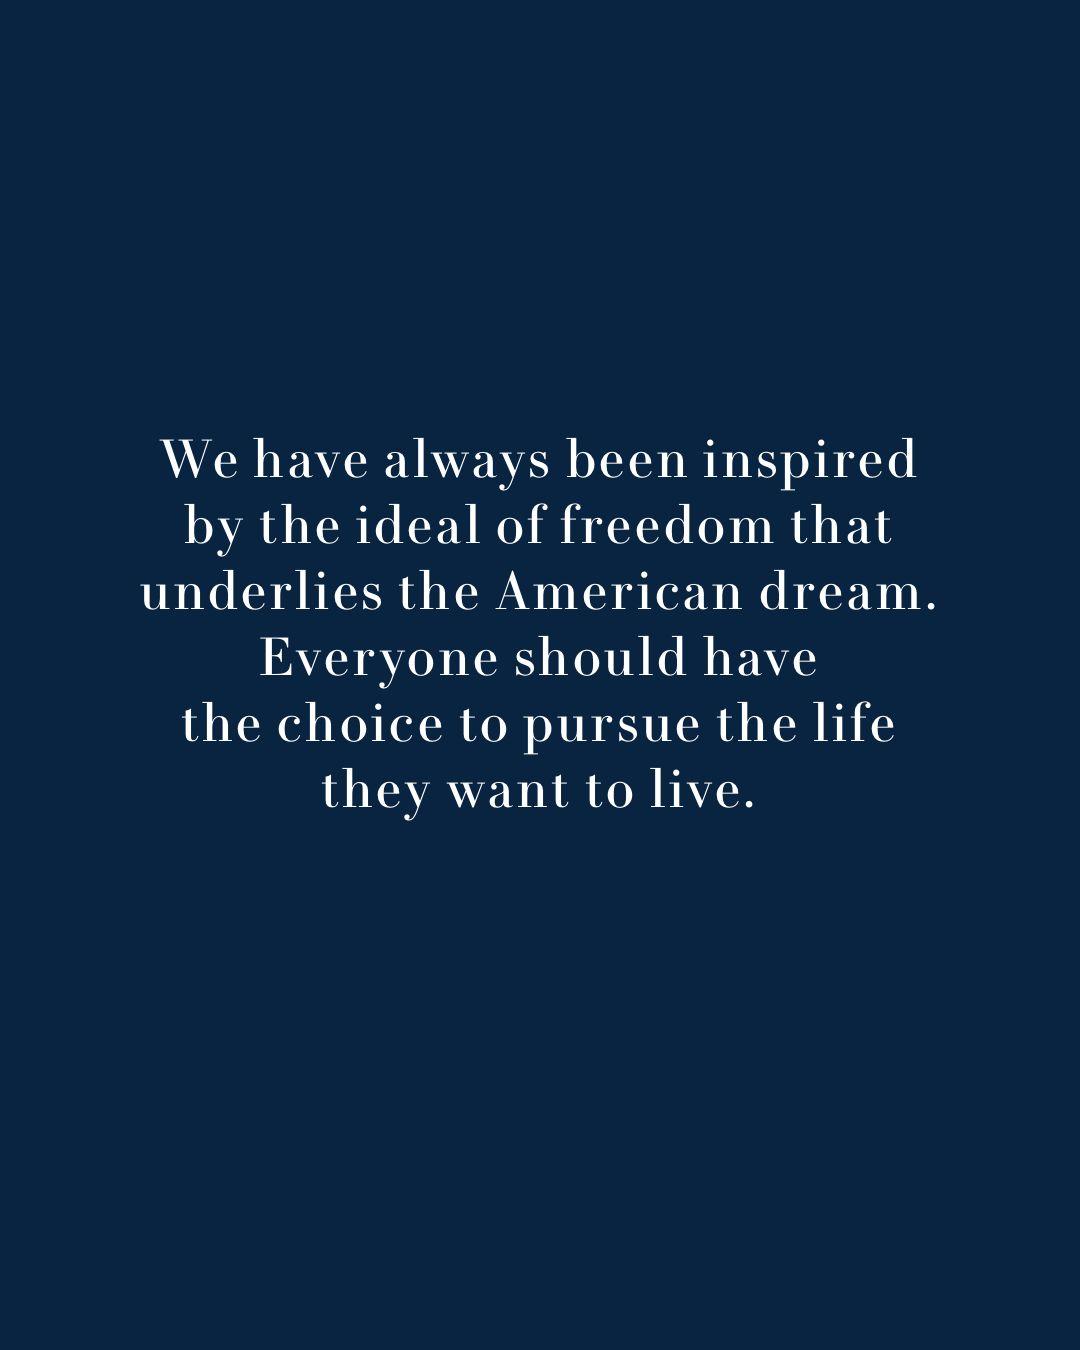 Text: We have always been inspired by the ideal of freedom that underlies the American dream. Everyone should have the choice to pursue the life they want to live.